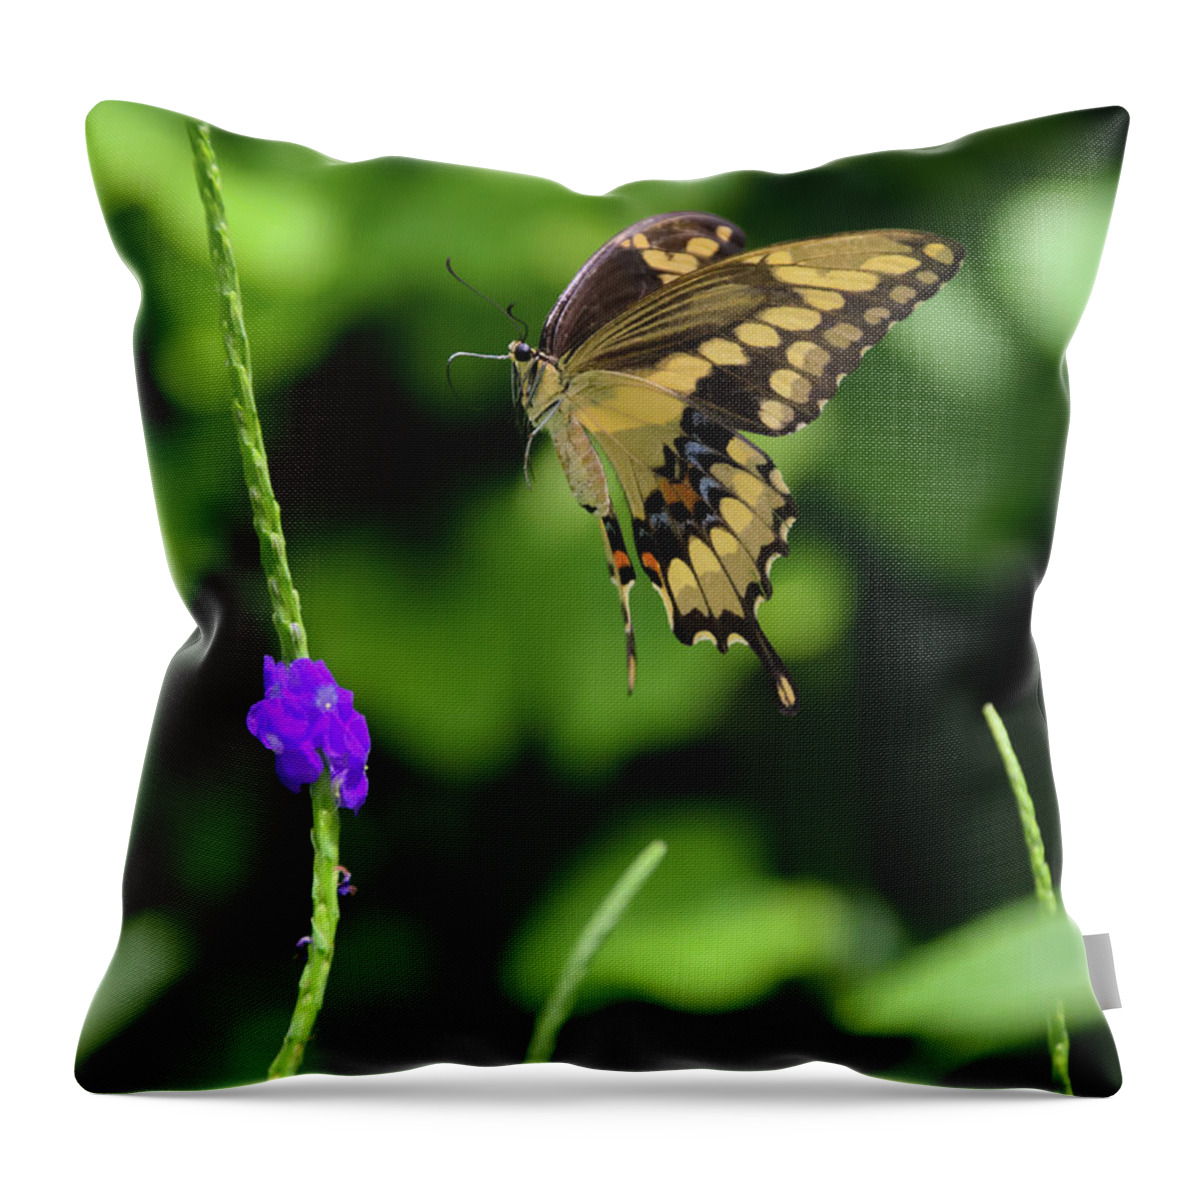 Butterfly Throw Pillow featuring the photograph Giant Swallowtail Butterfly Landing on a Purple Flower by Artful Imagery